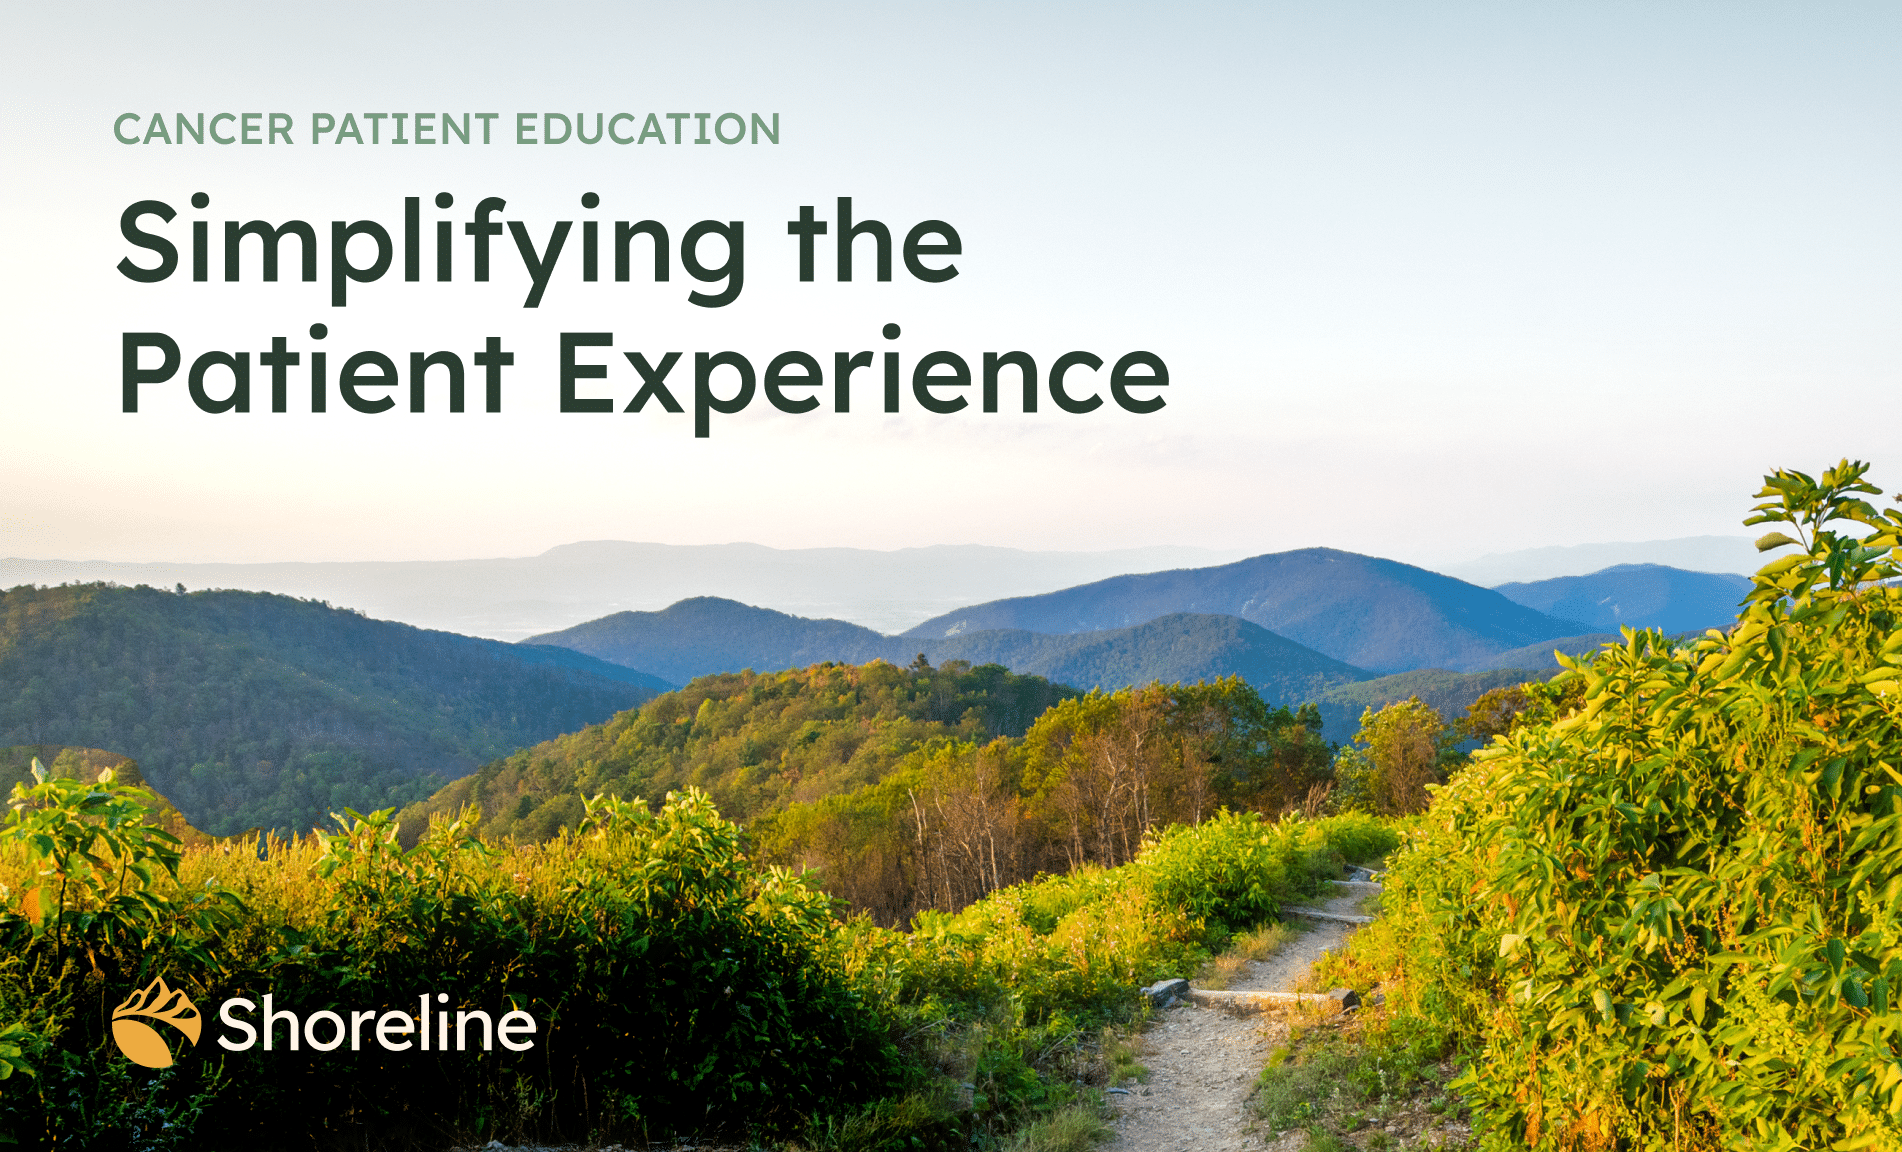 Footpath in the mountains with hills in the distance, words overlaid "Cancer Patient Education: Simplifying the Patient Experience; Shoreline"